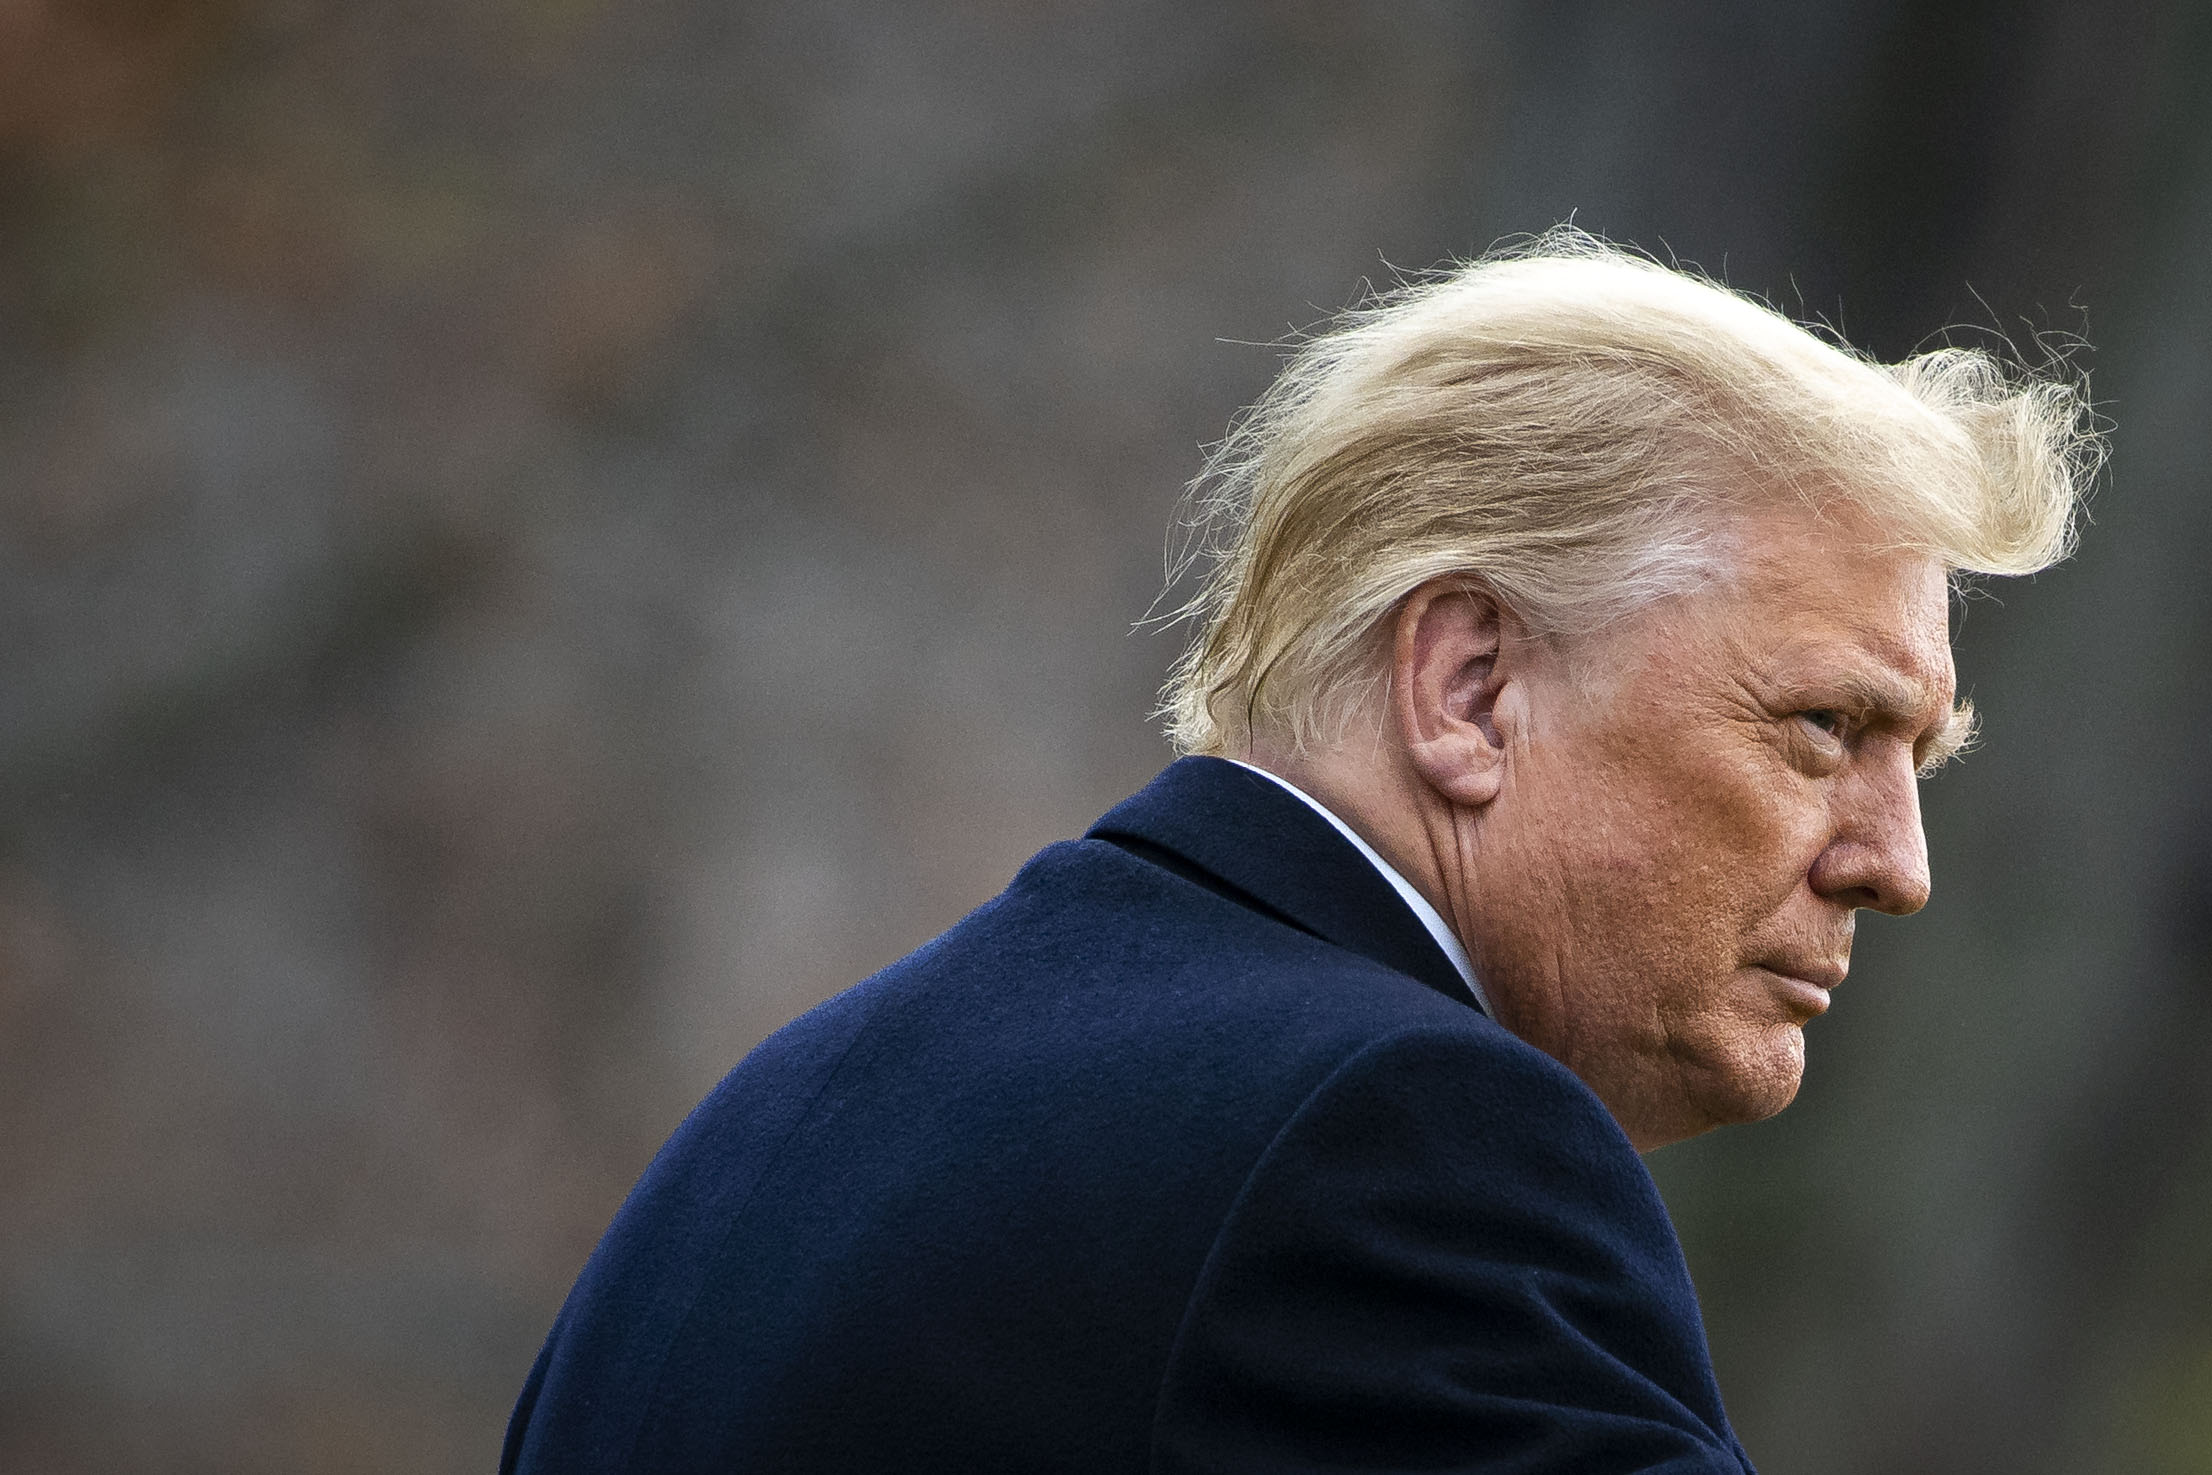 Trump, seen from the side, looks over his shoulder, frowning slightly. His white and blonde hair is being pulled back by the wind.